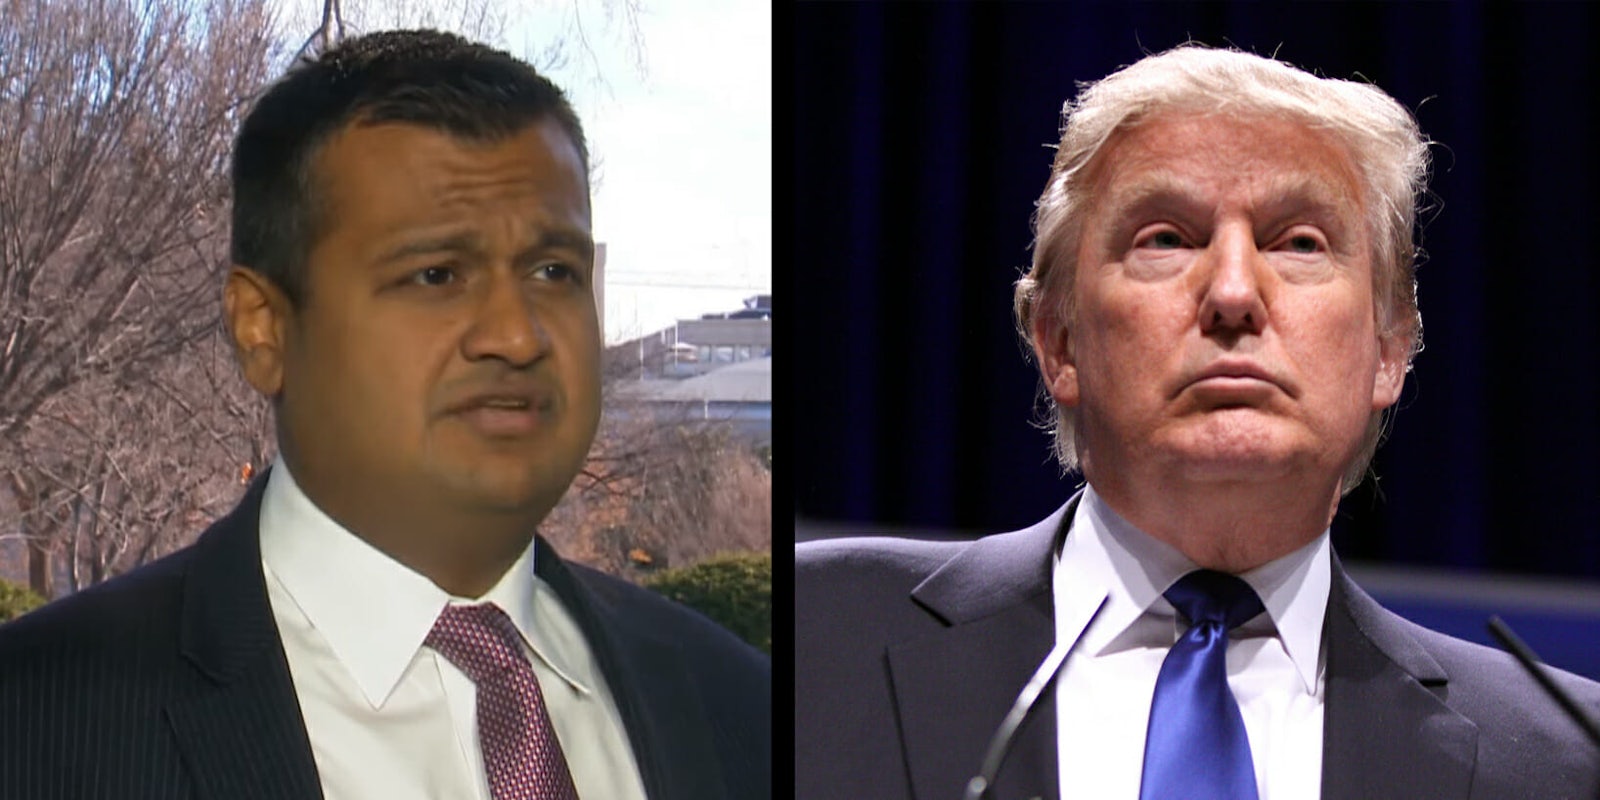 White House spokesman Raj Shah reportedly called then-candidate Donald Trump 'a deplorable' in messages obtained by New York Magazine.